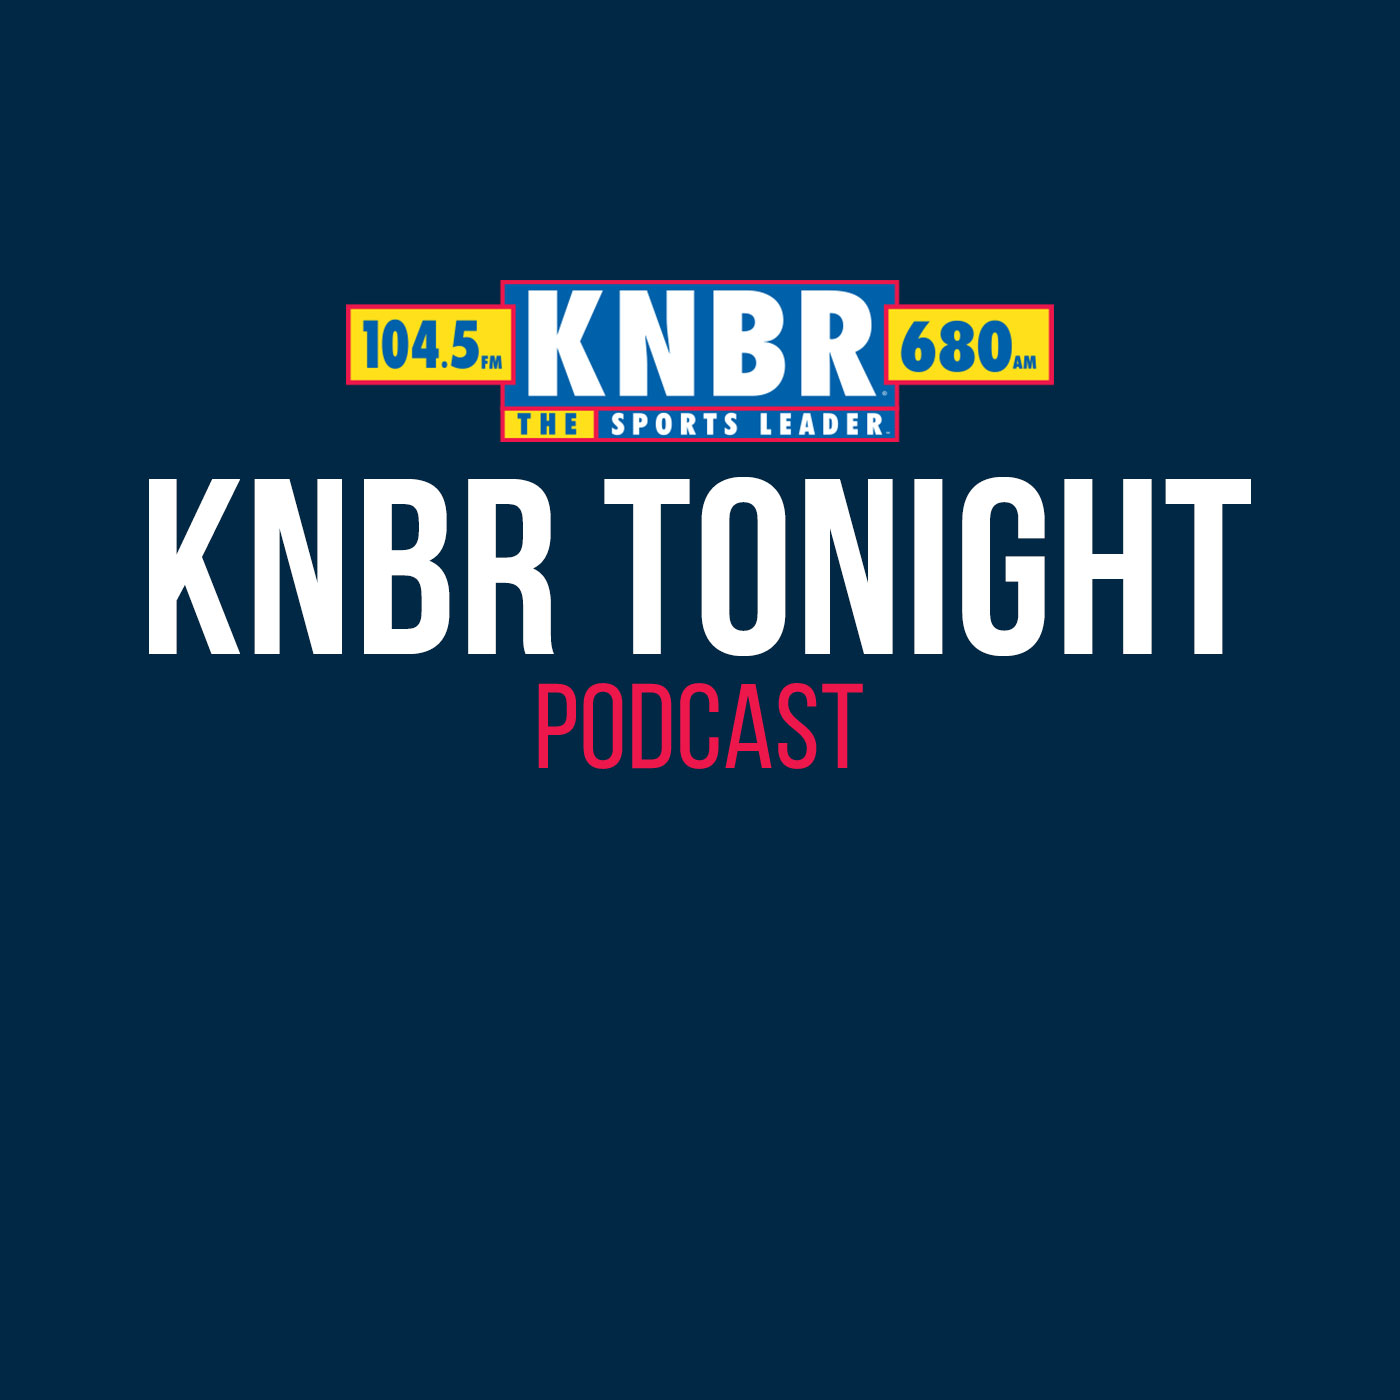 11-1 Kendra Andrews of NBCSBA joins Kerry Crowley and reveals the key to James Wiseman's growth